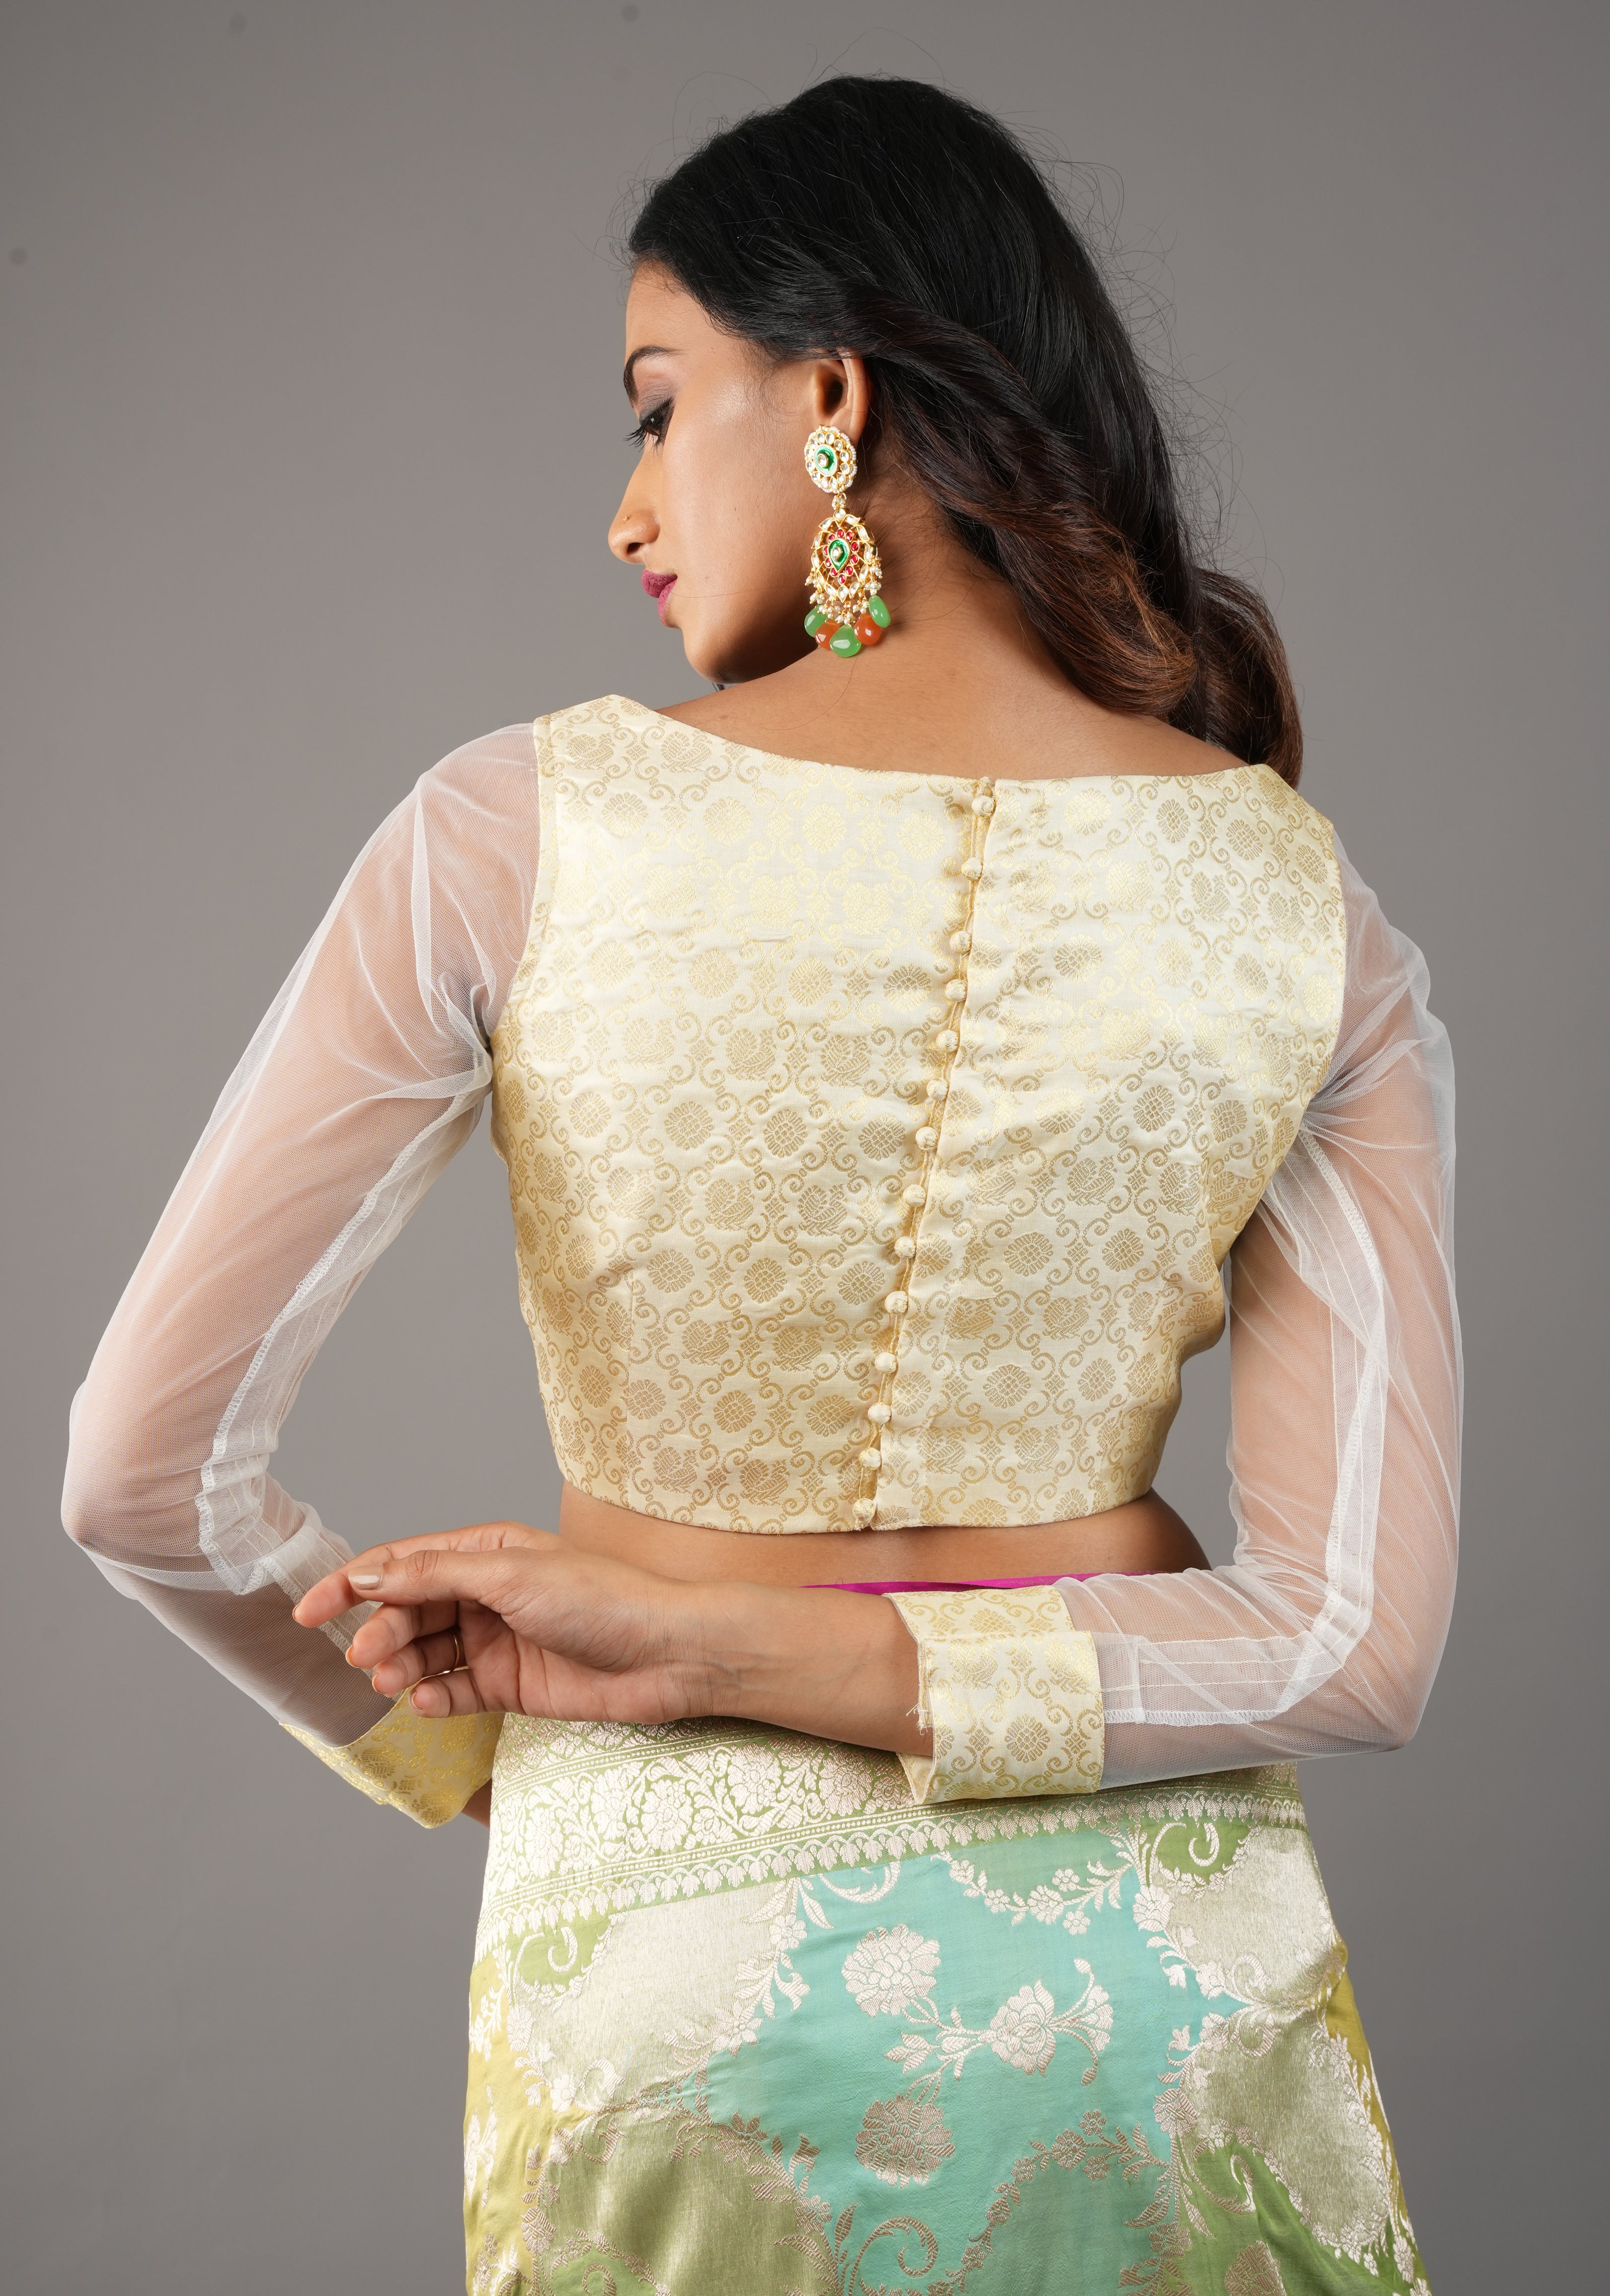 Ivory Kanjivaram Brocade Pure Silk Blouse with Scalloped Neckline and Sheer Sleeves, customizable, made-to-order